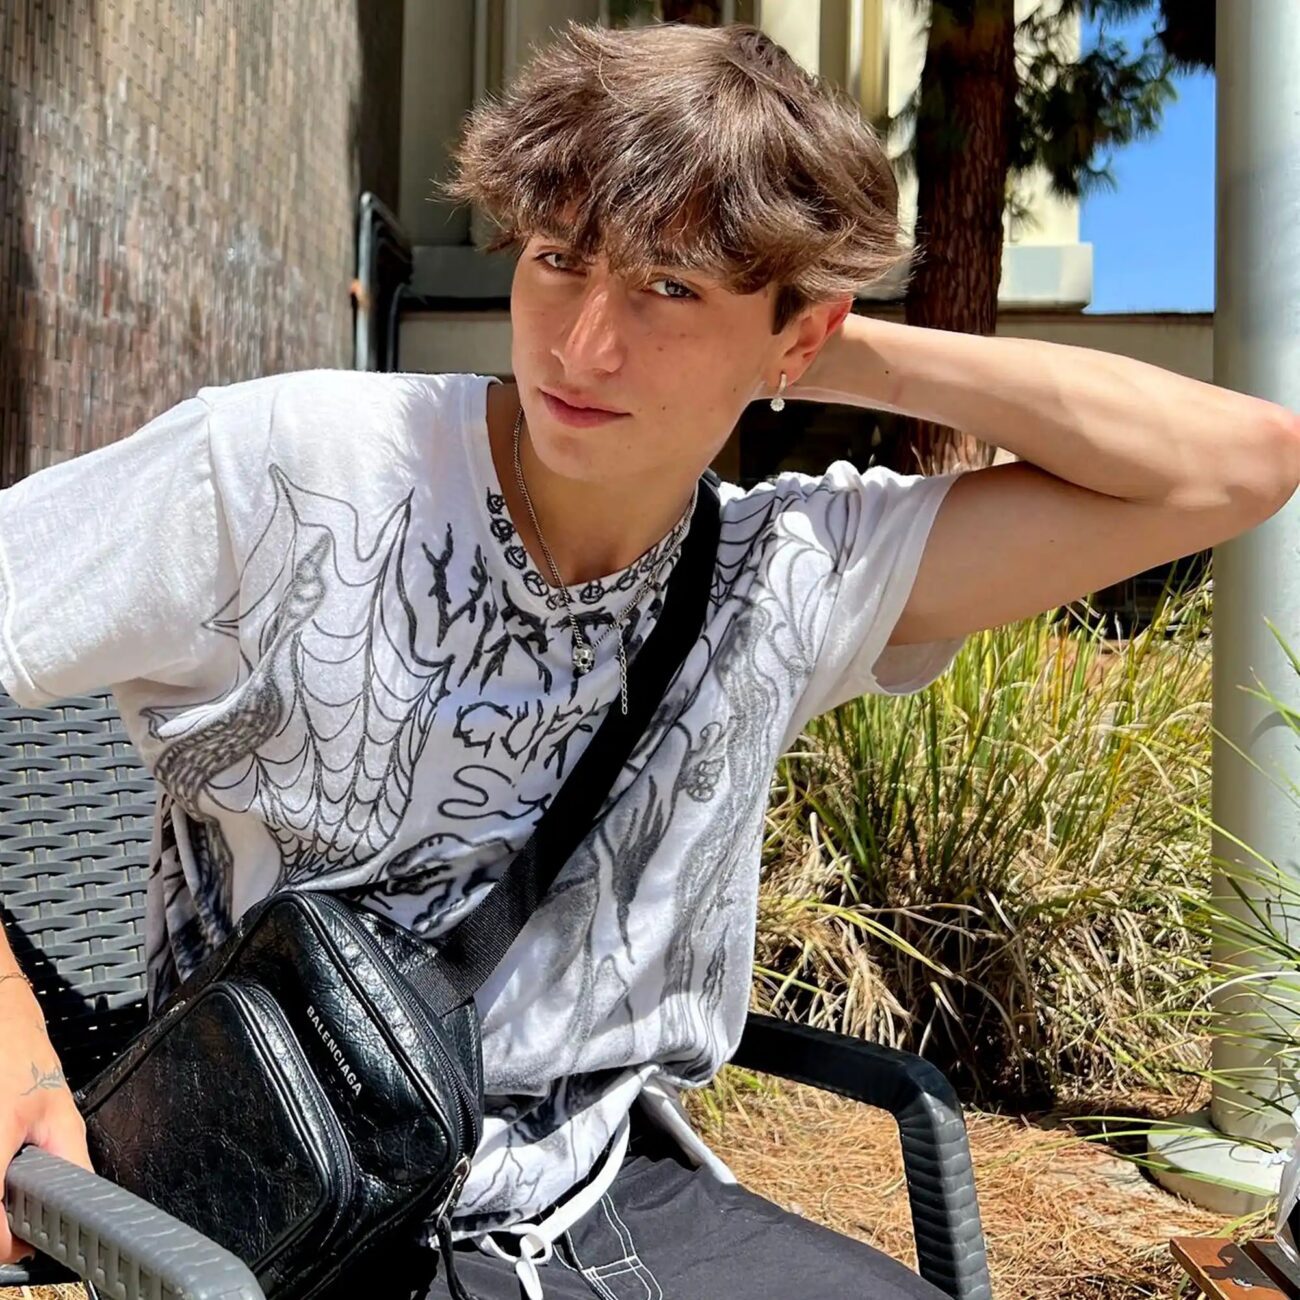 On June 10th, TikTok star Cooper Noriega was found dead and fans have reacted worldwide. Has best friend and musician Nessa Barrett reacted?